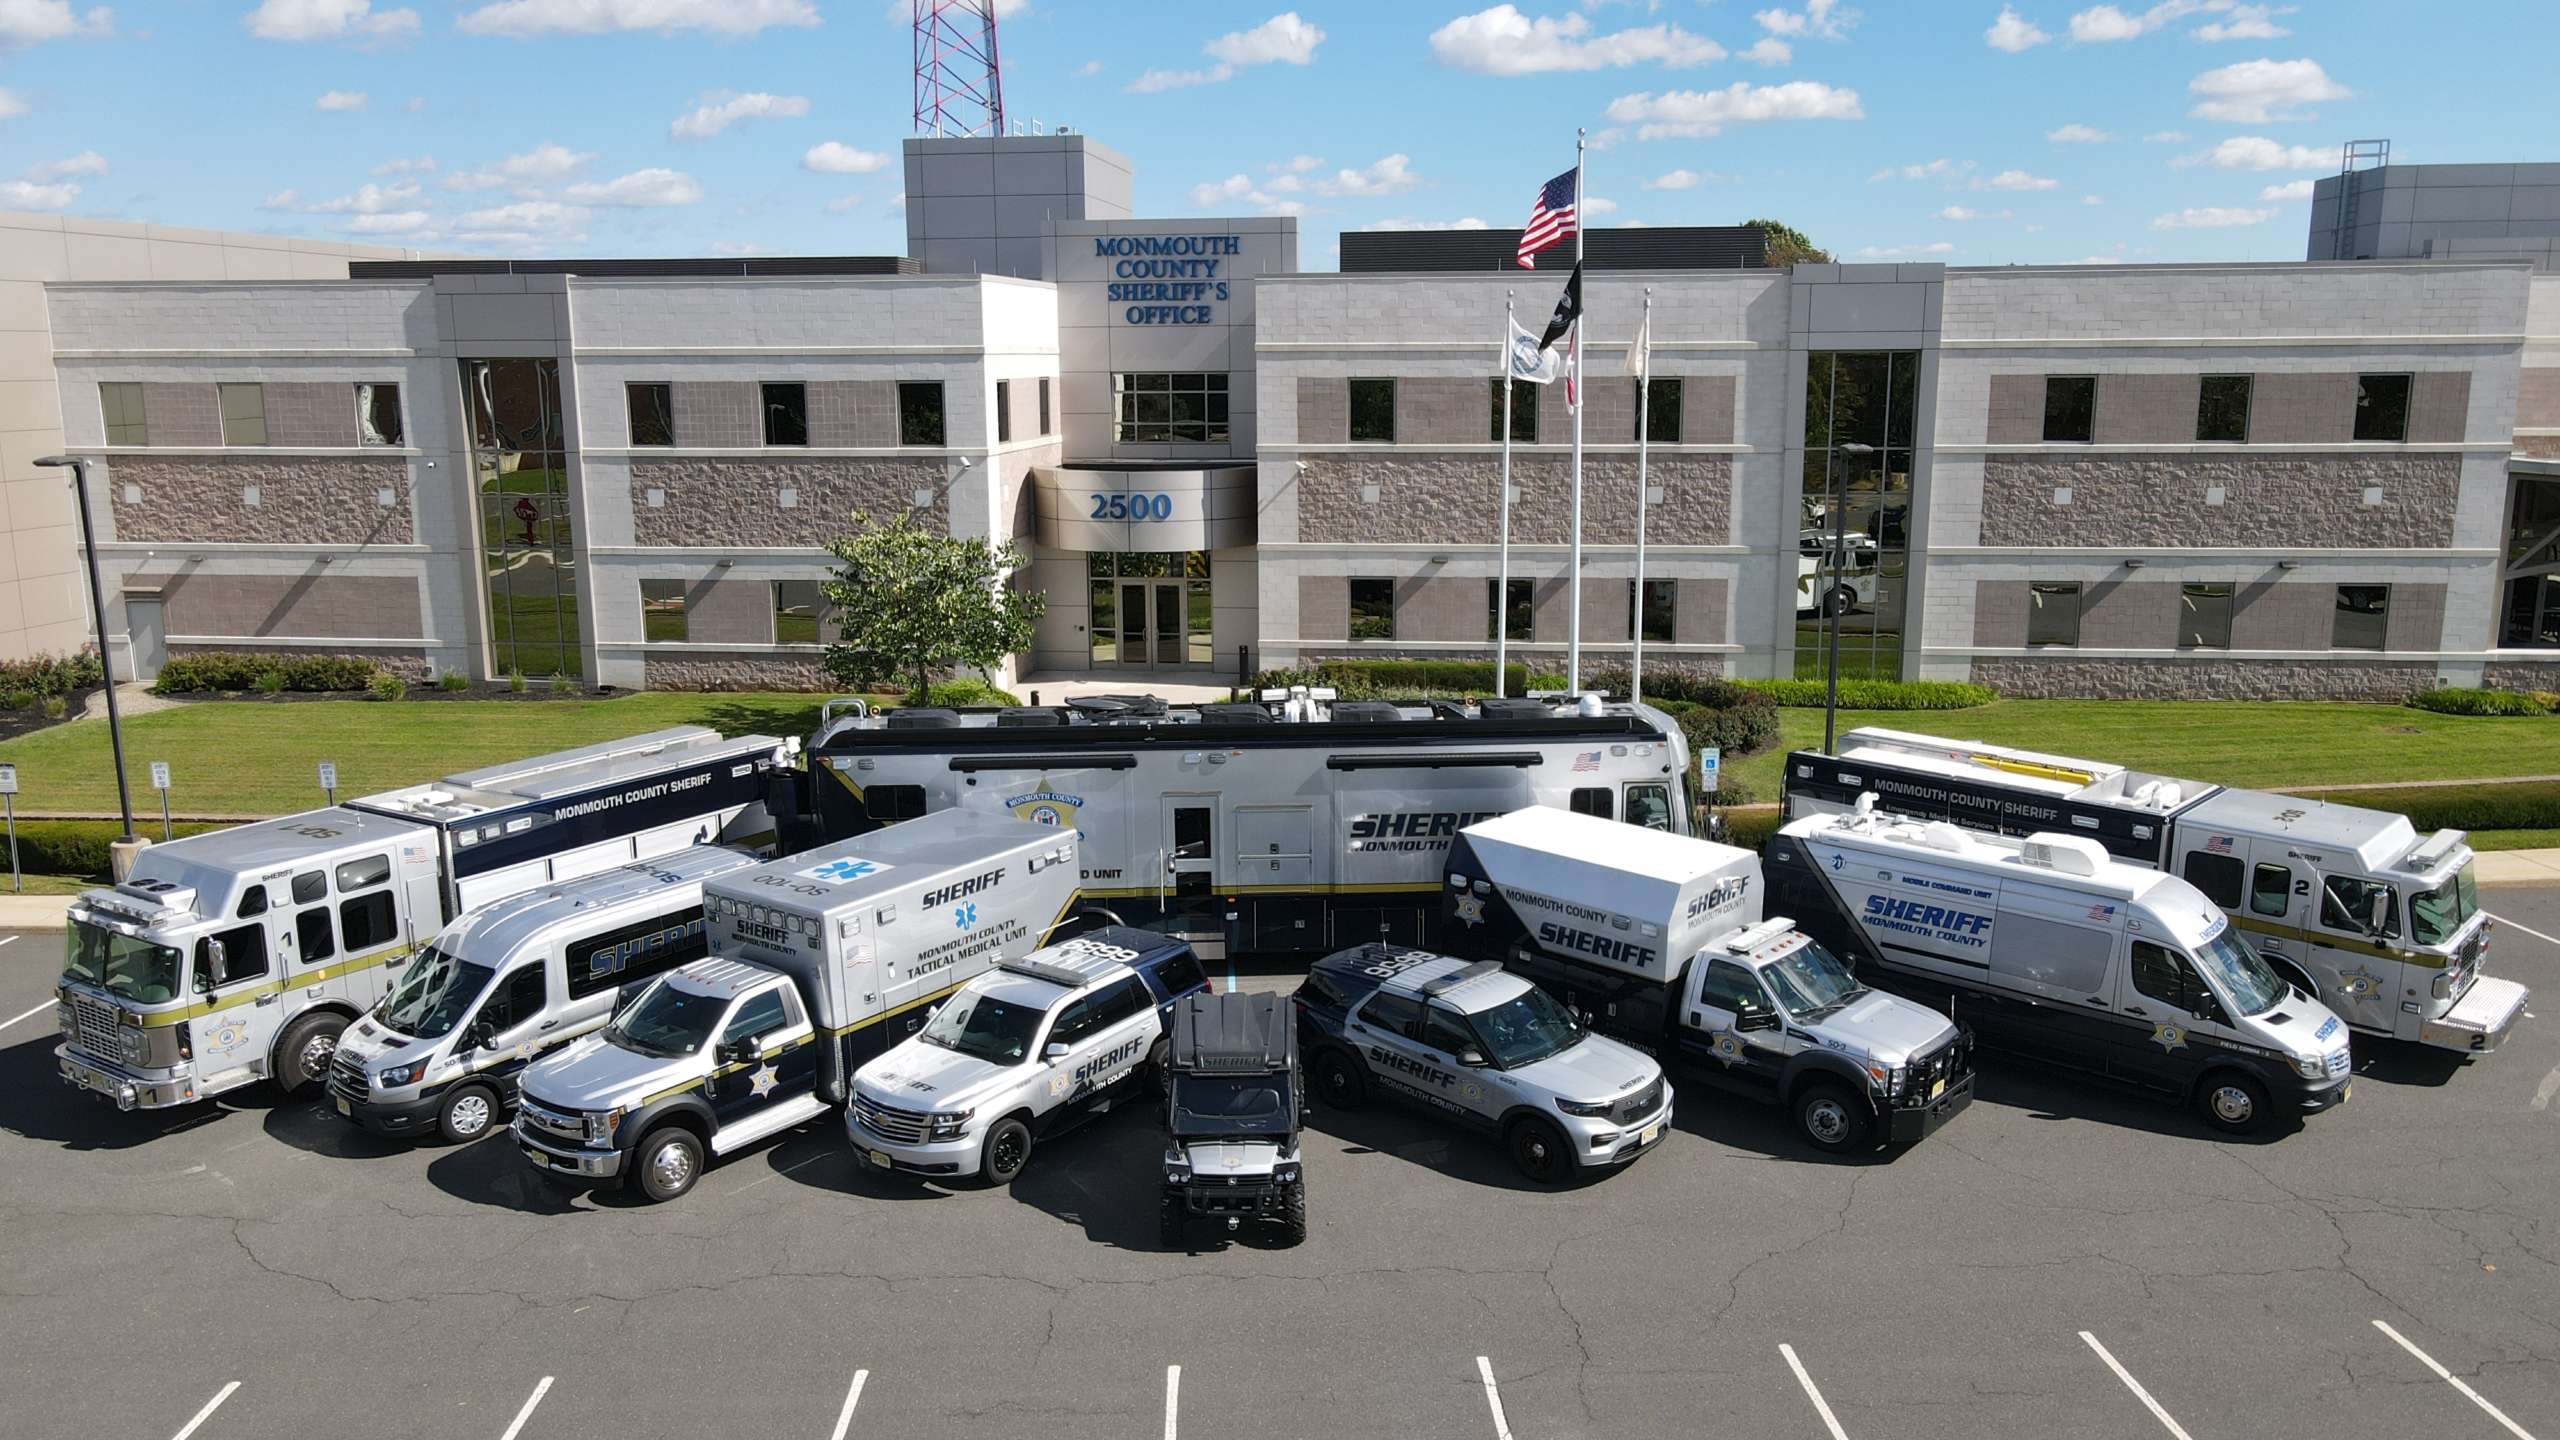 Monmouth County Sheriff's Office